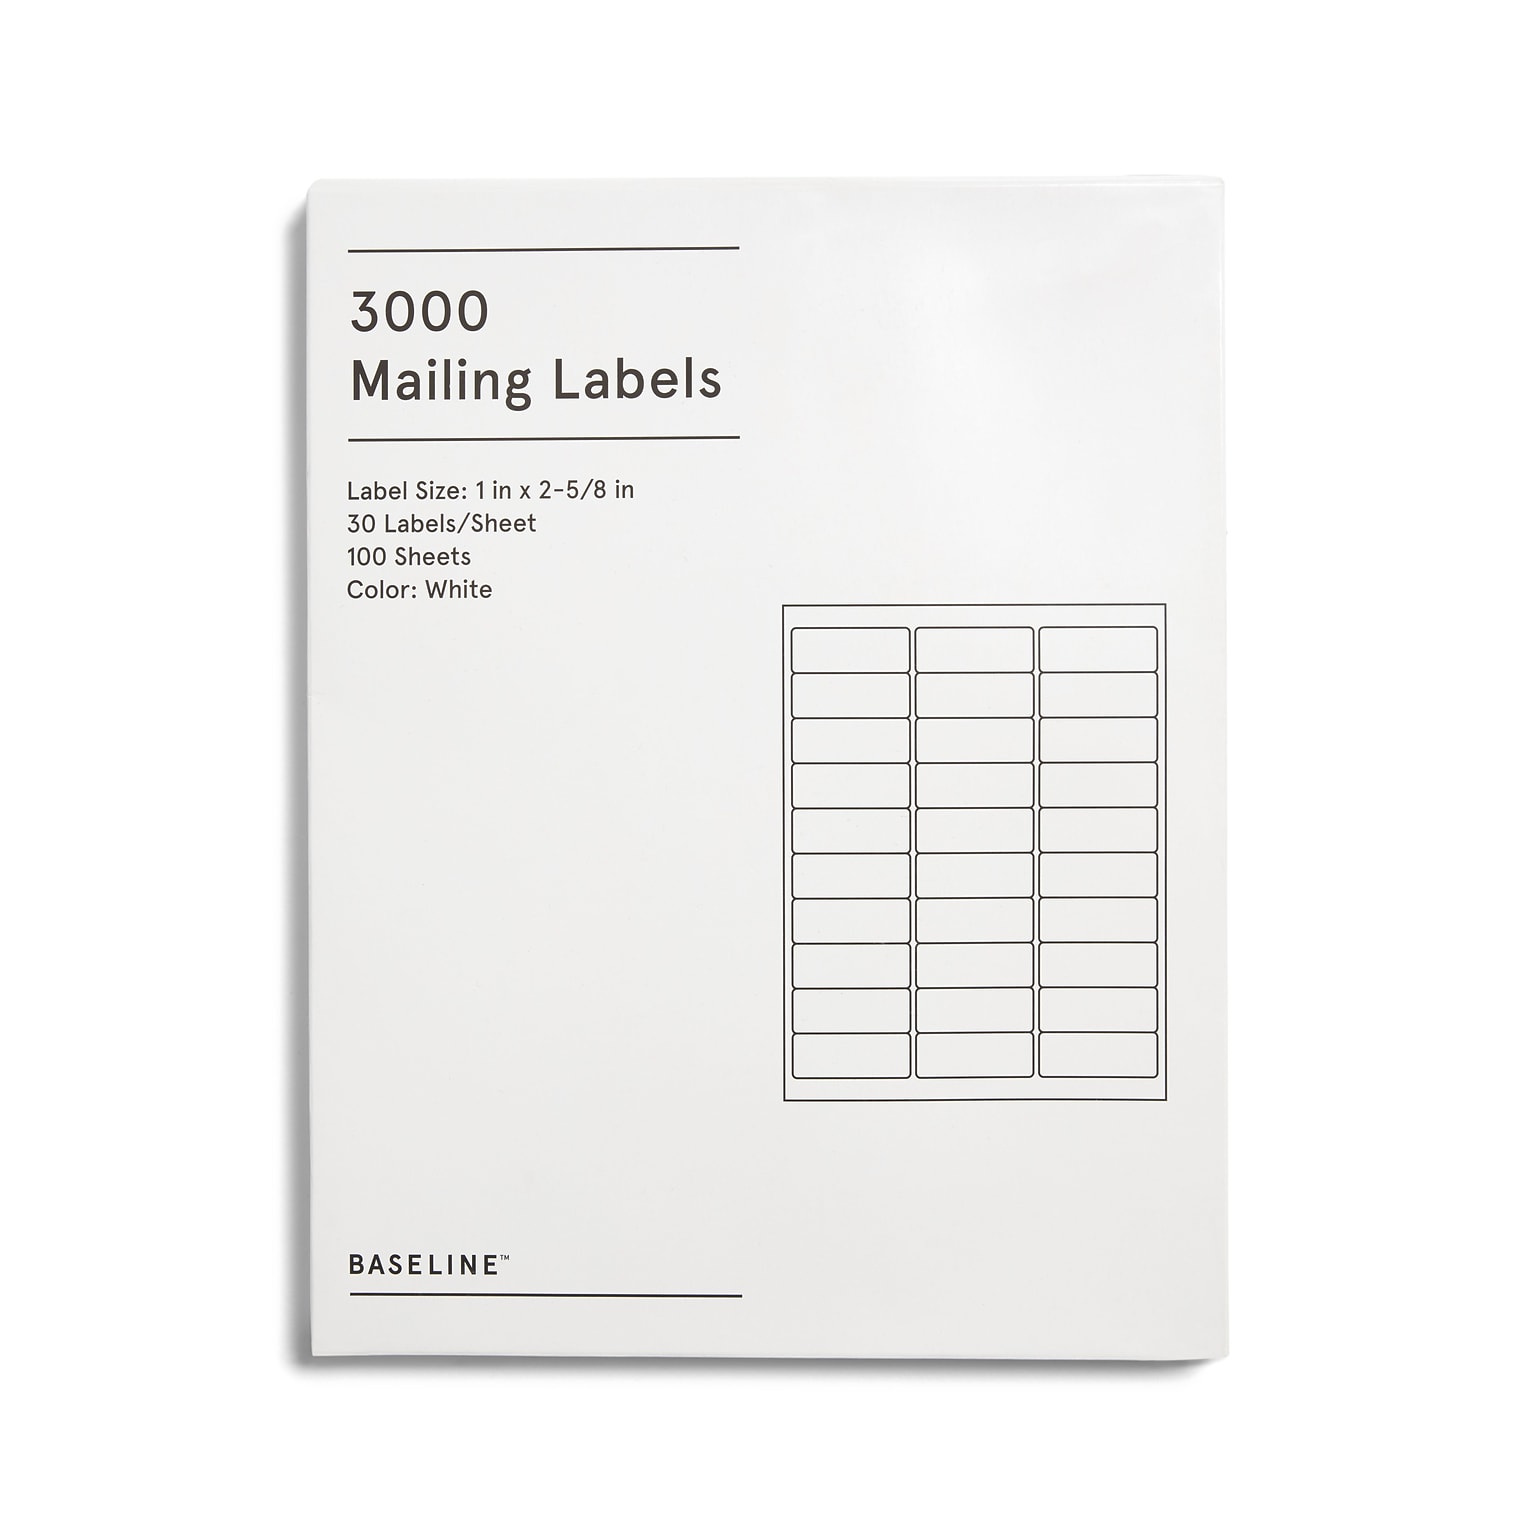 Baseline Laser/Inkjet Mailing Labels, 1 x 2-5/8, White, 3000 Labels (Compare to Avery 5160, 5260 & 8160)